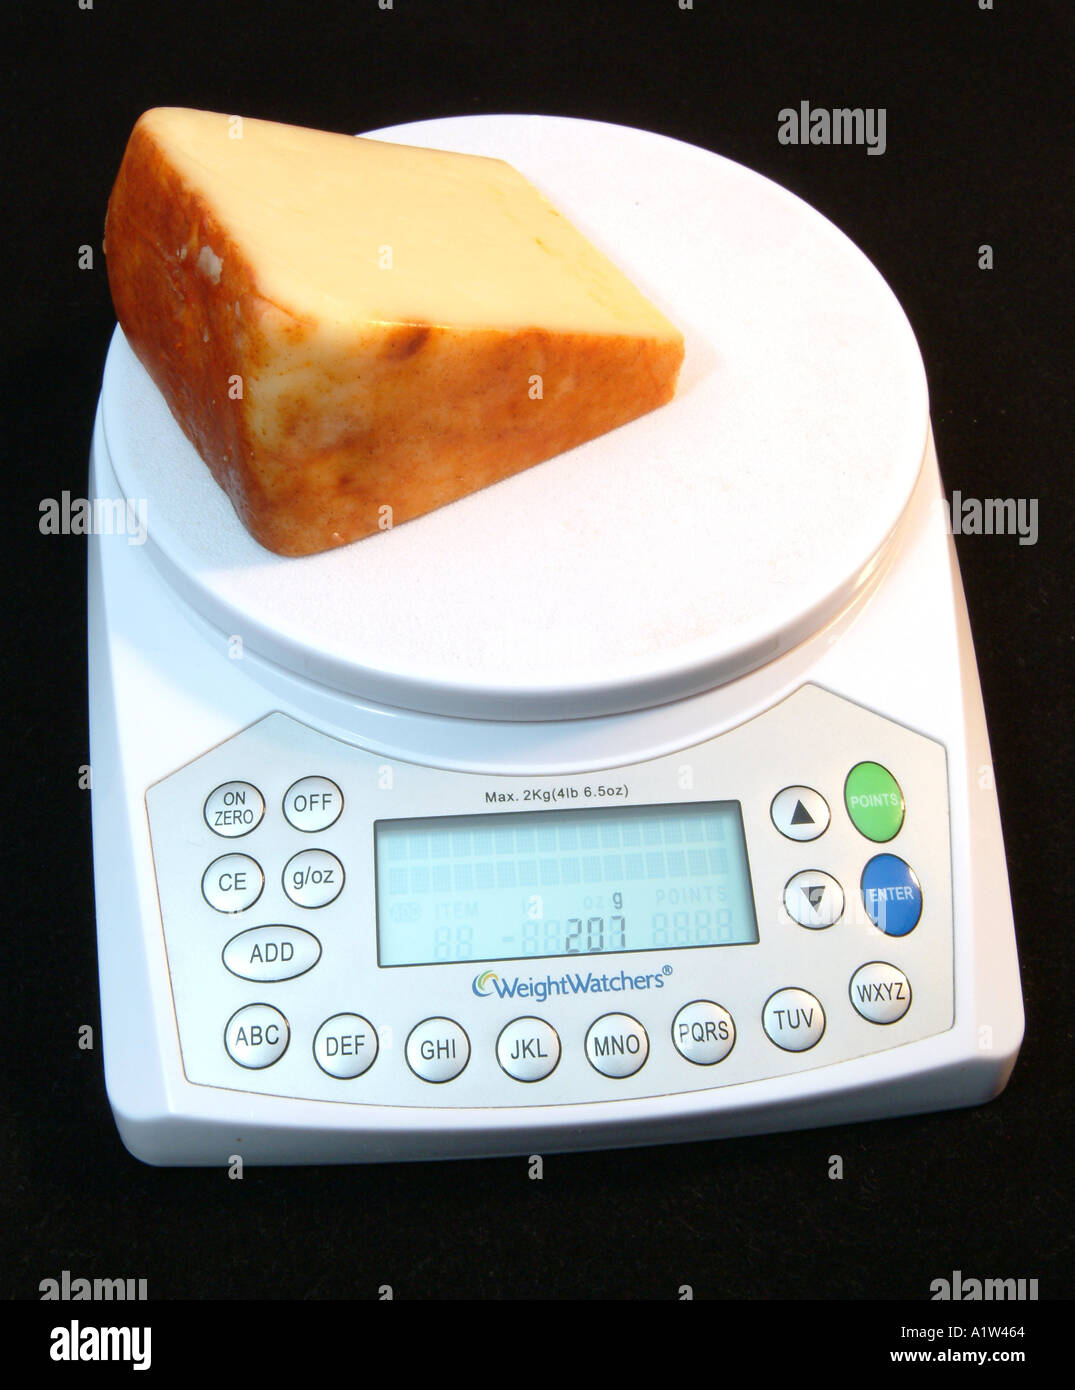 https://c8.alamy.com/comp/A1W464/weight-watchers-scales-with-a-slice-of-smoked-cheddar-cheese-A1W464.jpg